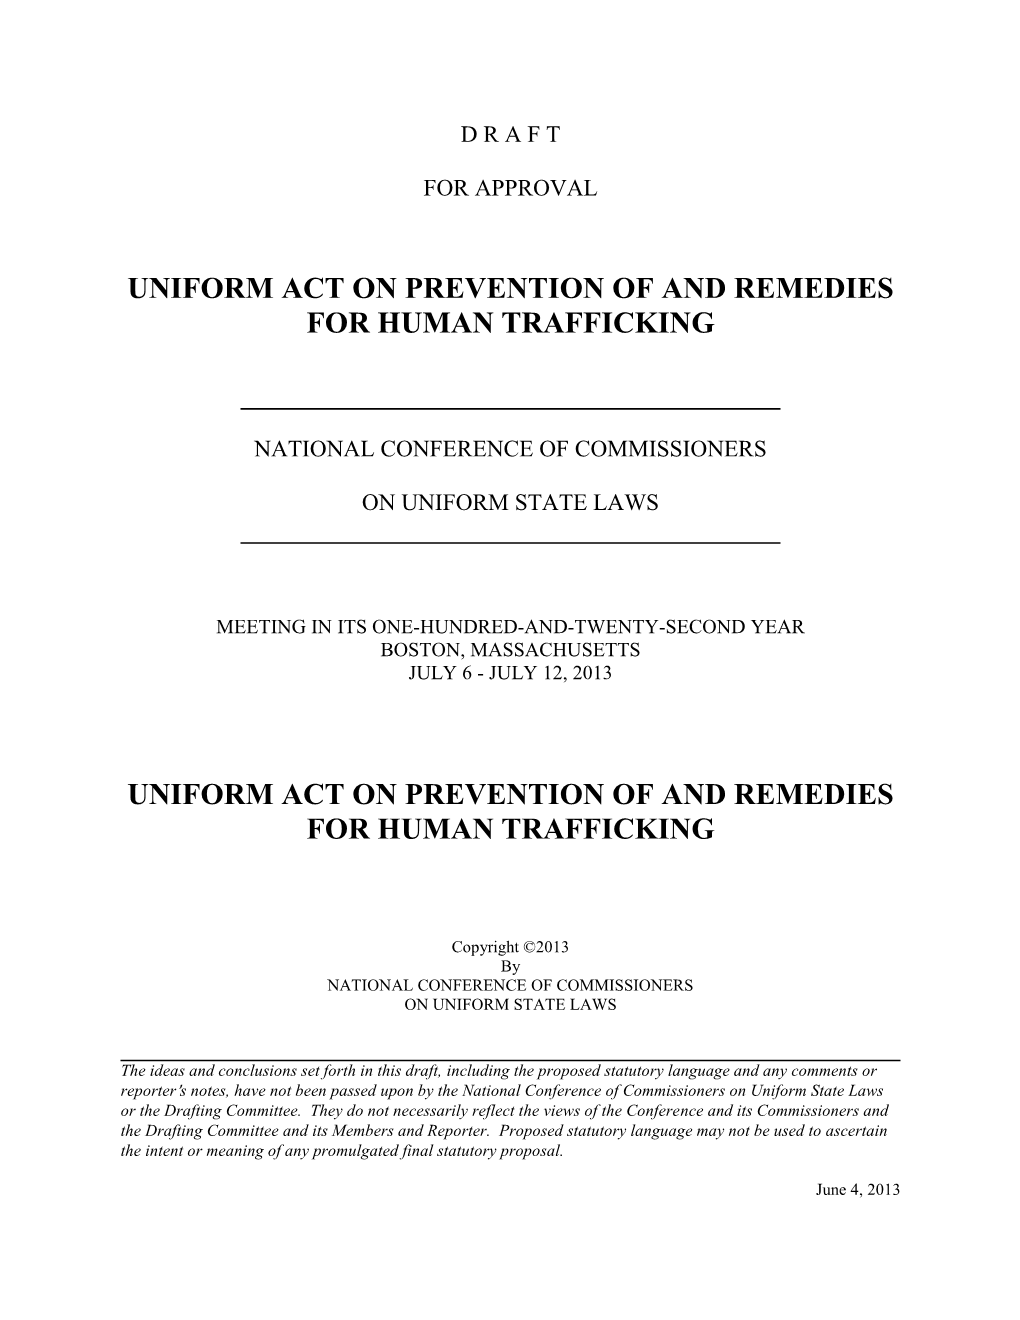 Uniform Act on Prevention of and Remedies for Human Trafficking